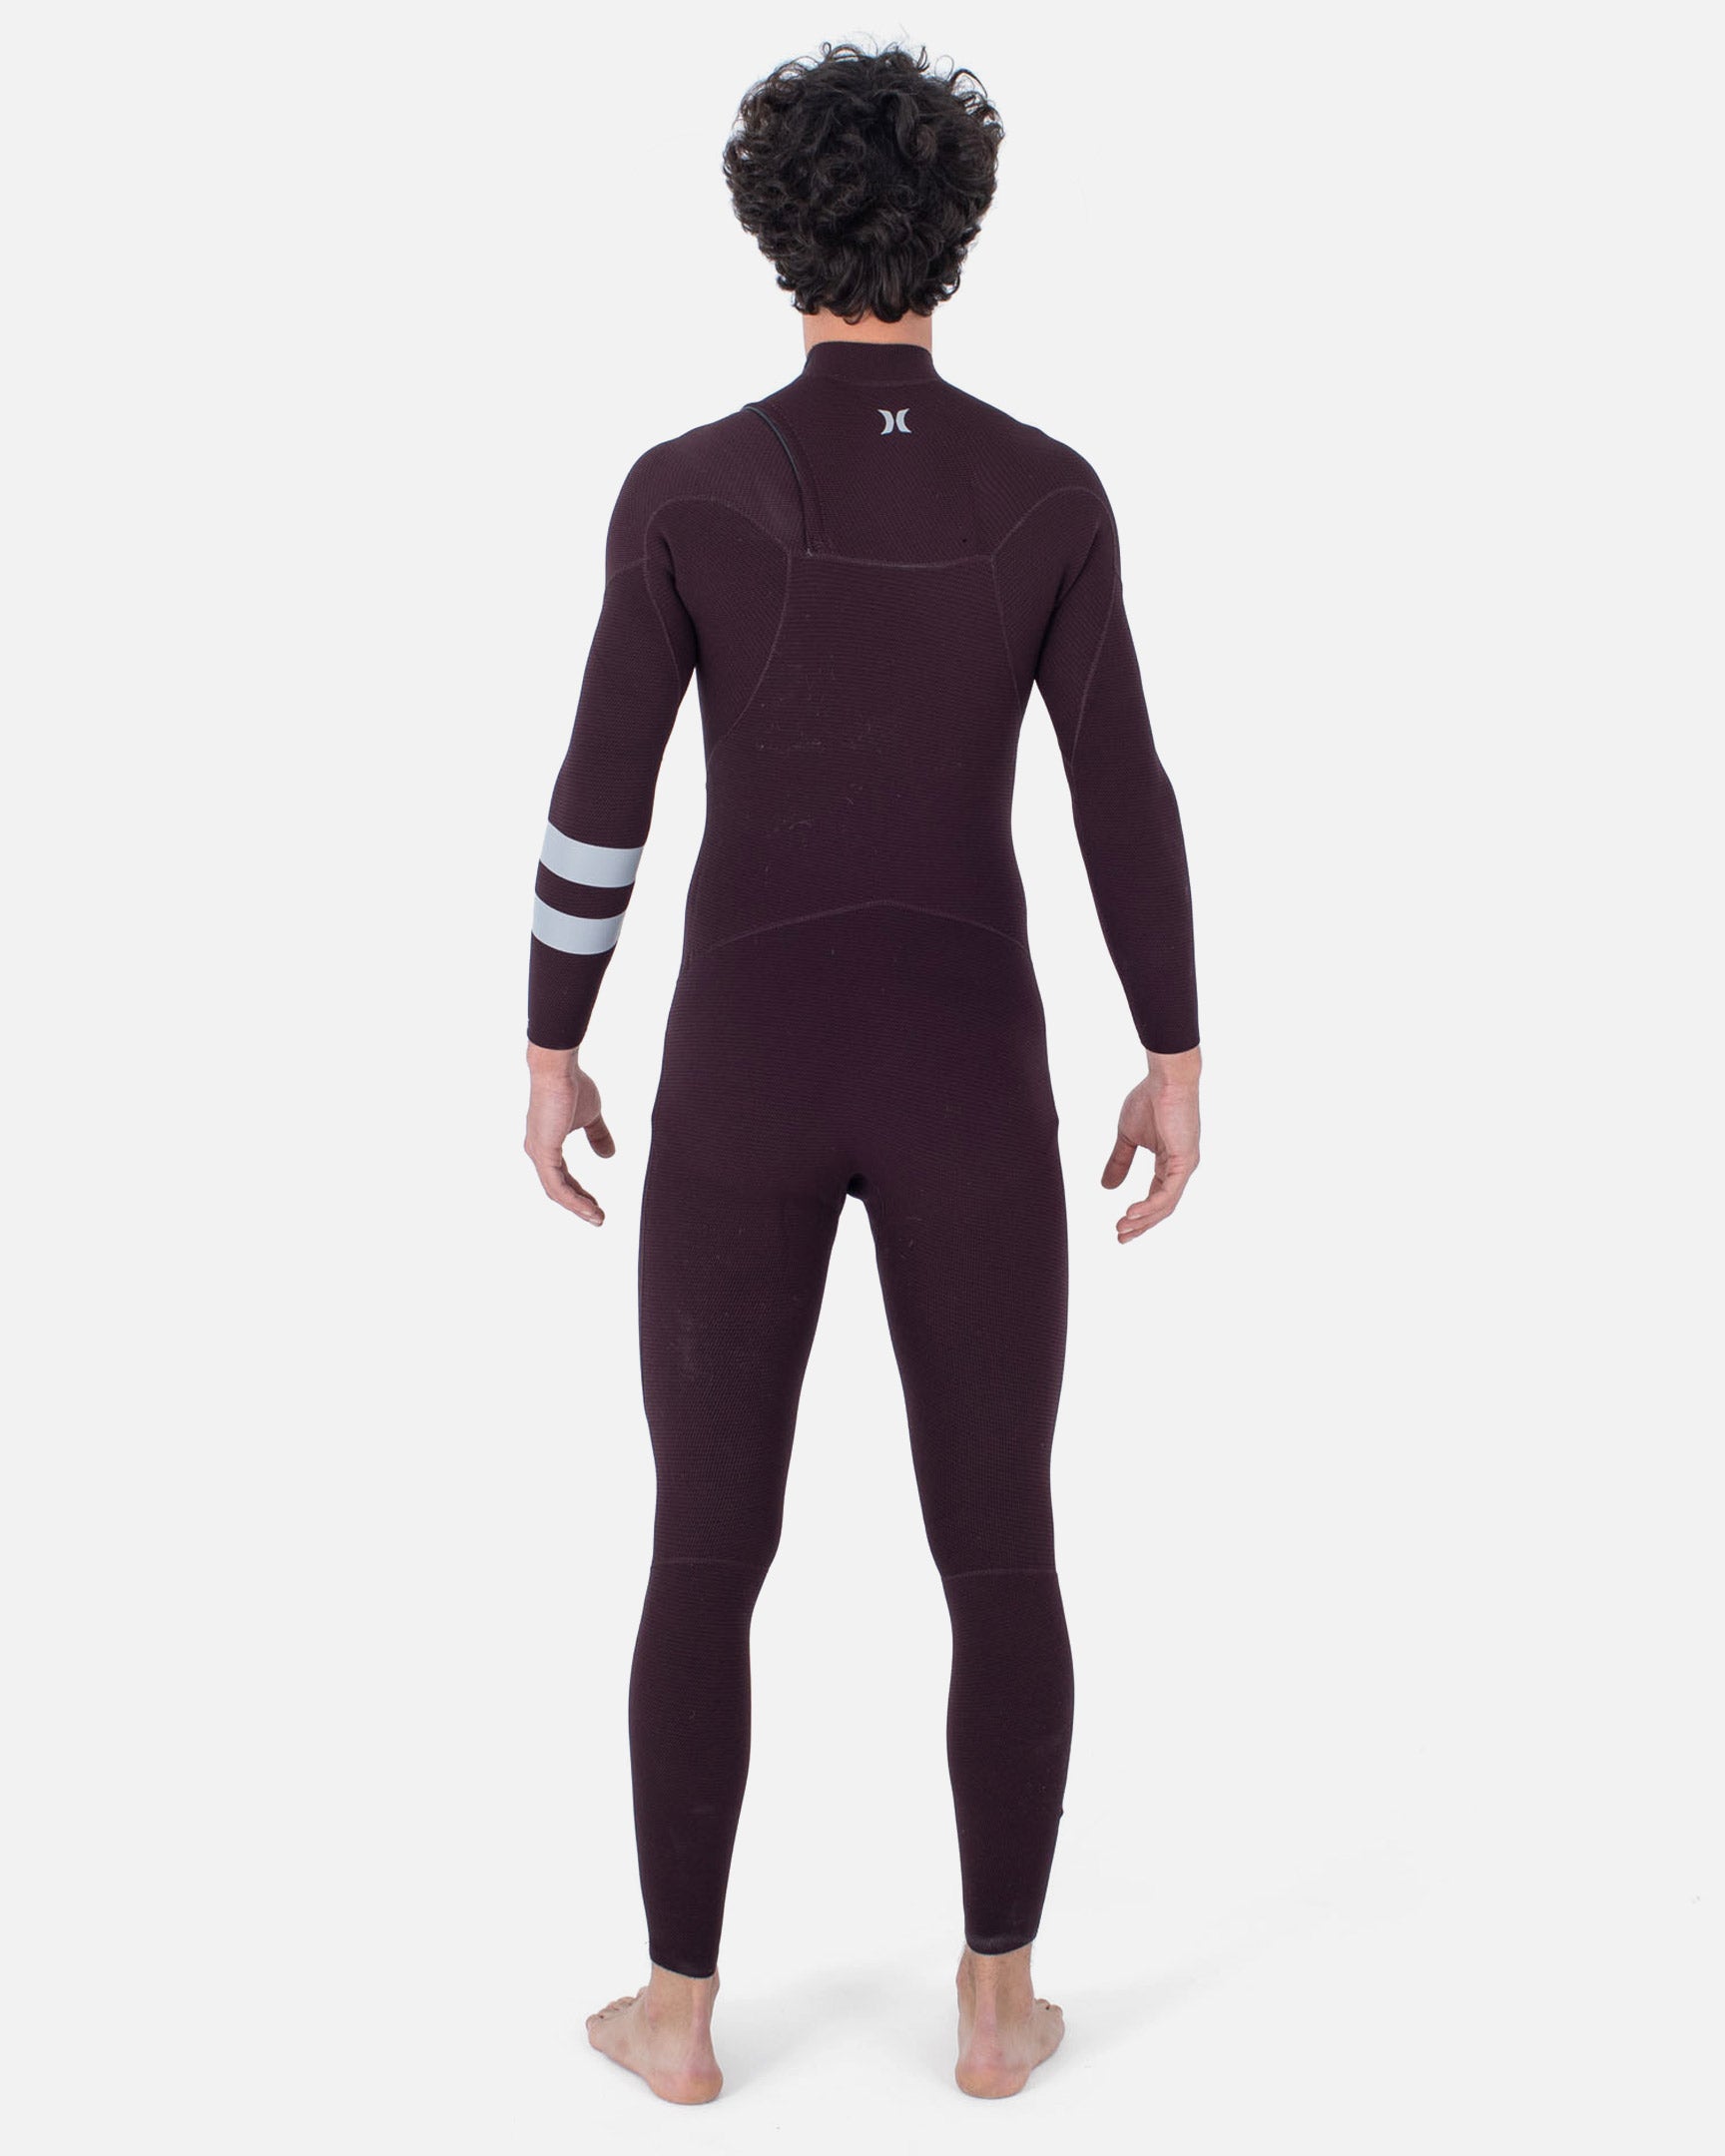 The new @hurley wetsuits are here right in time for winter. The